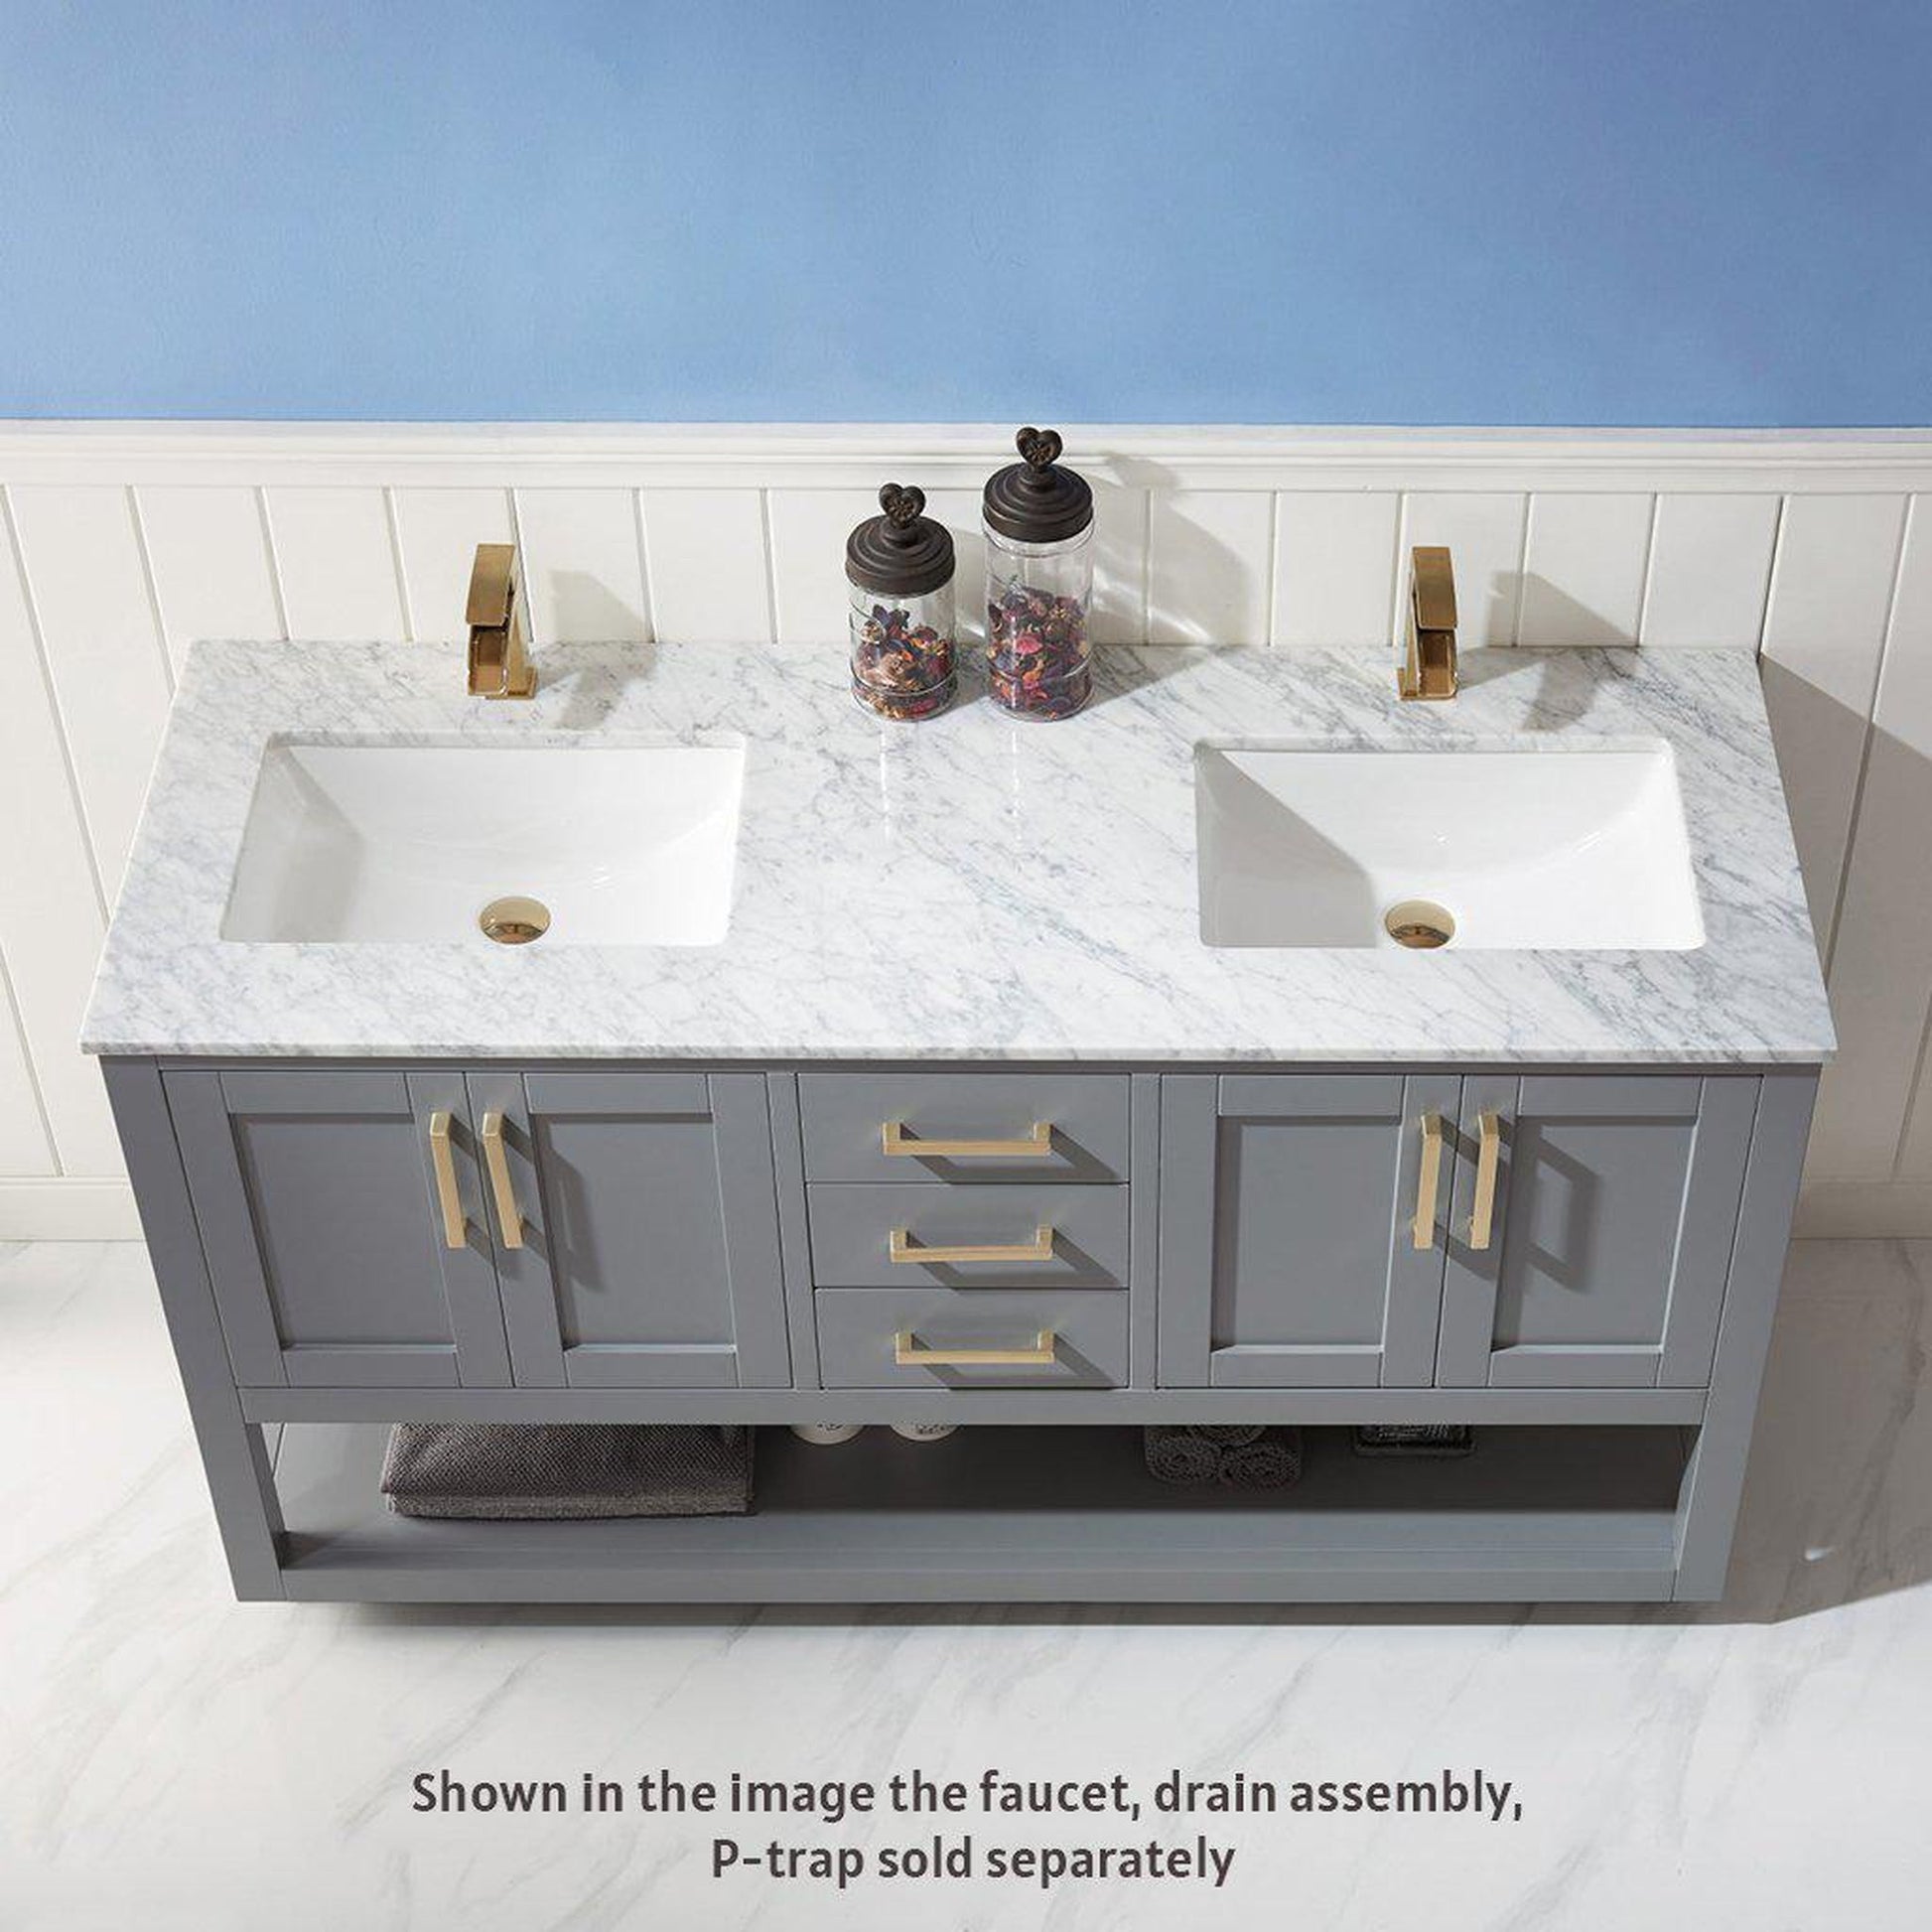 Altair Remi 60" Double Gray Freestanding Bathroom Vanity Set With Natural Carrara White Marble Top, Two Rectangular Undermount Ceramic Sinks, and Overflow